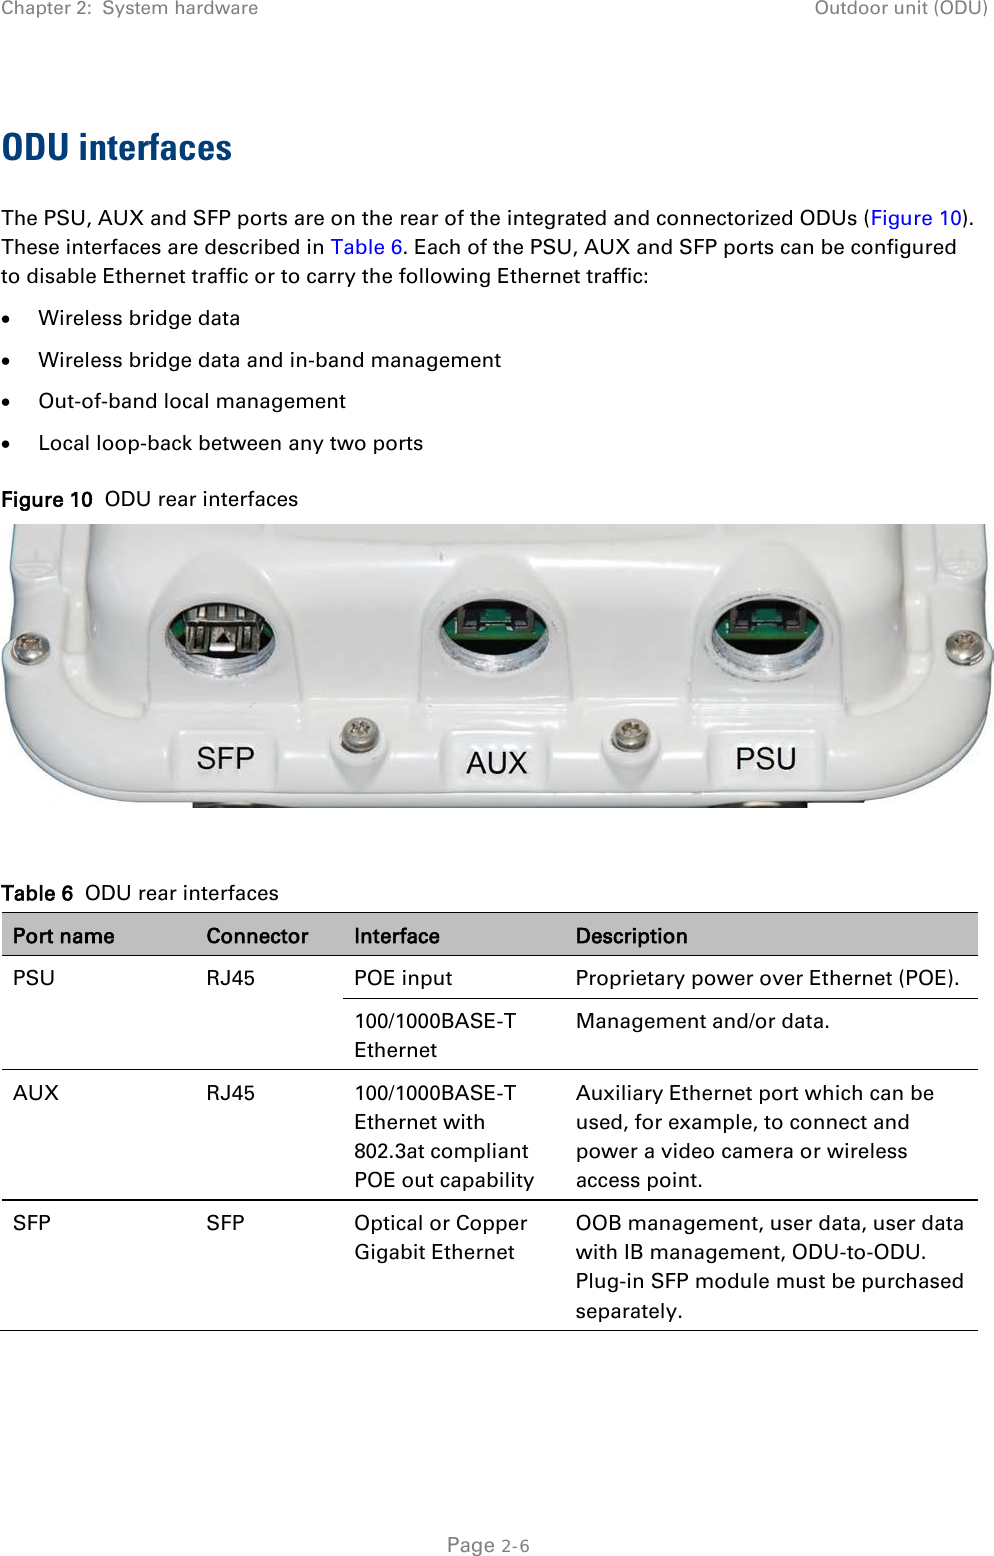 Chapter 2:  System hardware Outdoor unit (ODU)  ODU interfaces The PSU, AUX and SFP ports are on the rear of the integrated and connectorized ODUs (Figure 10). These interfaces are described in Table 6. Each of the PSU, AUX and SFP ports can be configured to disable Ethernet traffic or to carry the following Ethernet traffic: • Wireless bridge data • Wireless bridge data and in-band management • Out-of-band local management • Local loop-back between any two ports Figure 10  ODU rear interfaces   Table 6  ODU rear interfaces Port name Connector Interface Description PSU   RJ45 POE input Proprietary power over Ethernet (POE). 100/1000BASE-T Ethernet Management and/or data. AUX RJ45 100/1000BASE-T Ethernet with 802.3at compliant POE out capability Auxiliary Ethernet port which can be used, for example, to connect and power a video camera or wireless access point. SFP SFP Optical or Copper Gigabit Ethernet  OOB management, user data, user data with IB management, ODU-to-ODU. Plug-in SFP module must be purchased separately.  Page 2-6 